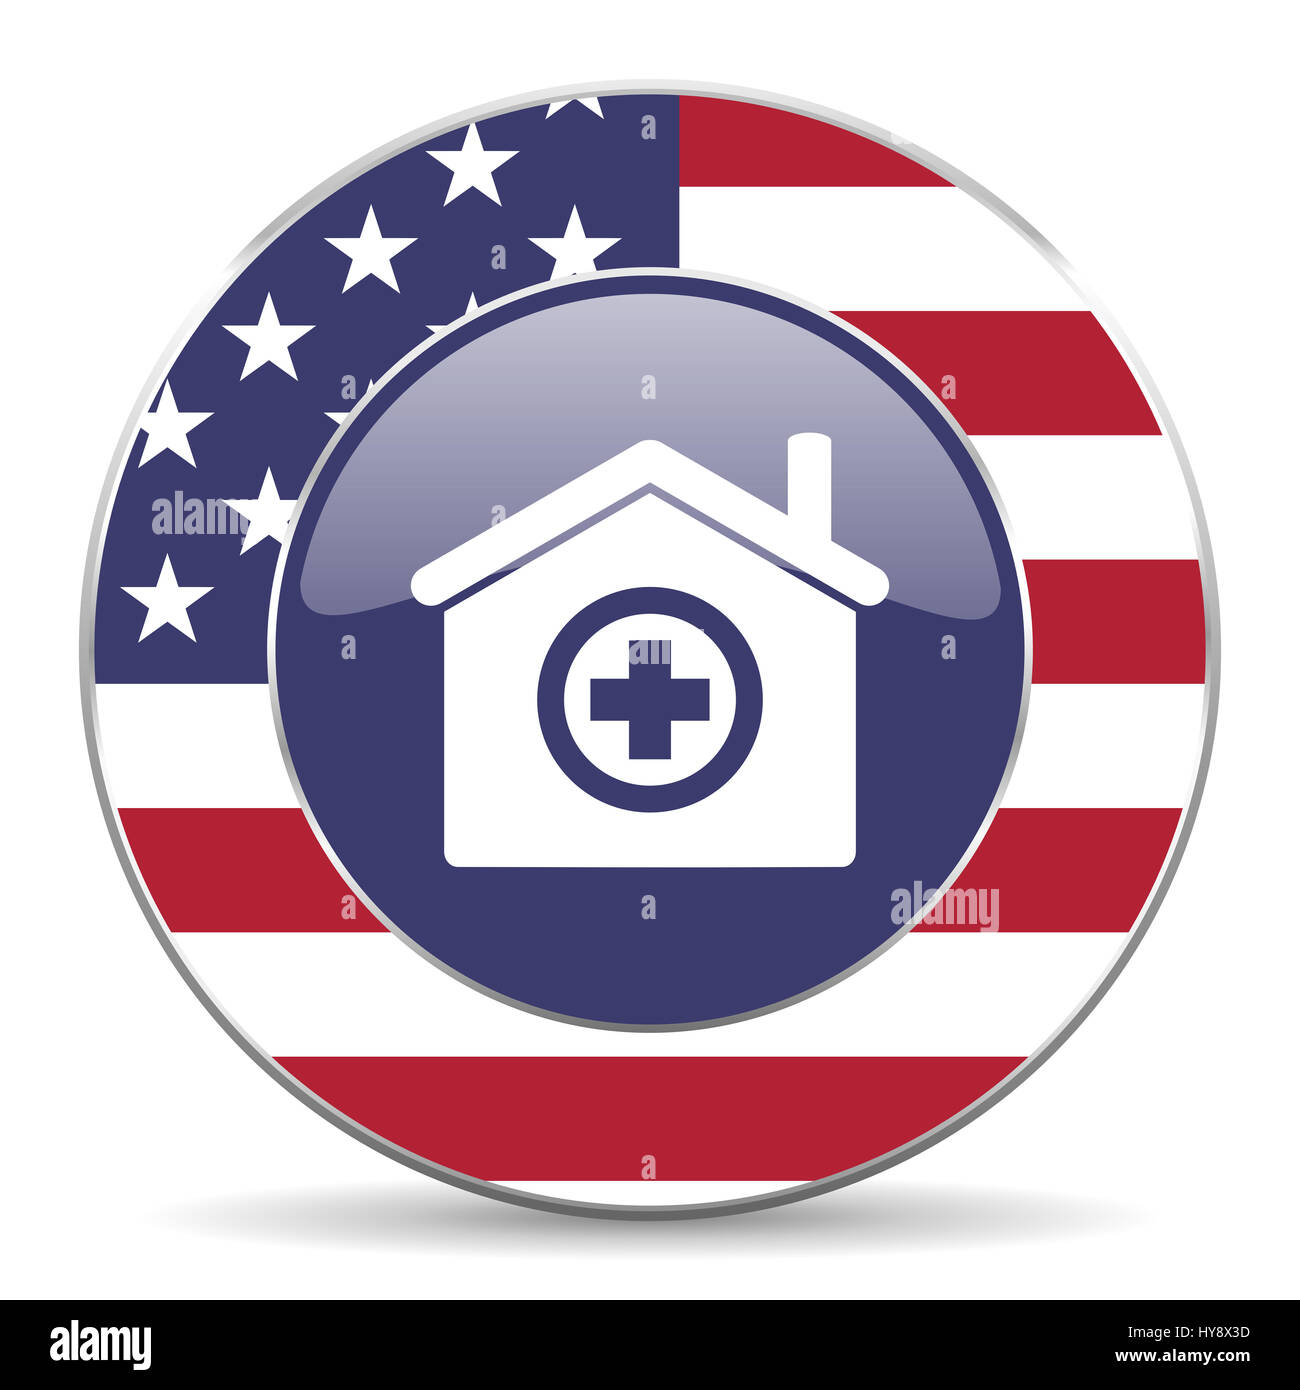 Hospital usa design web american round internet icon with shadow on white background. Stock Photo